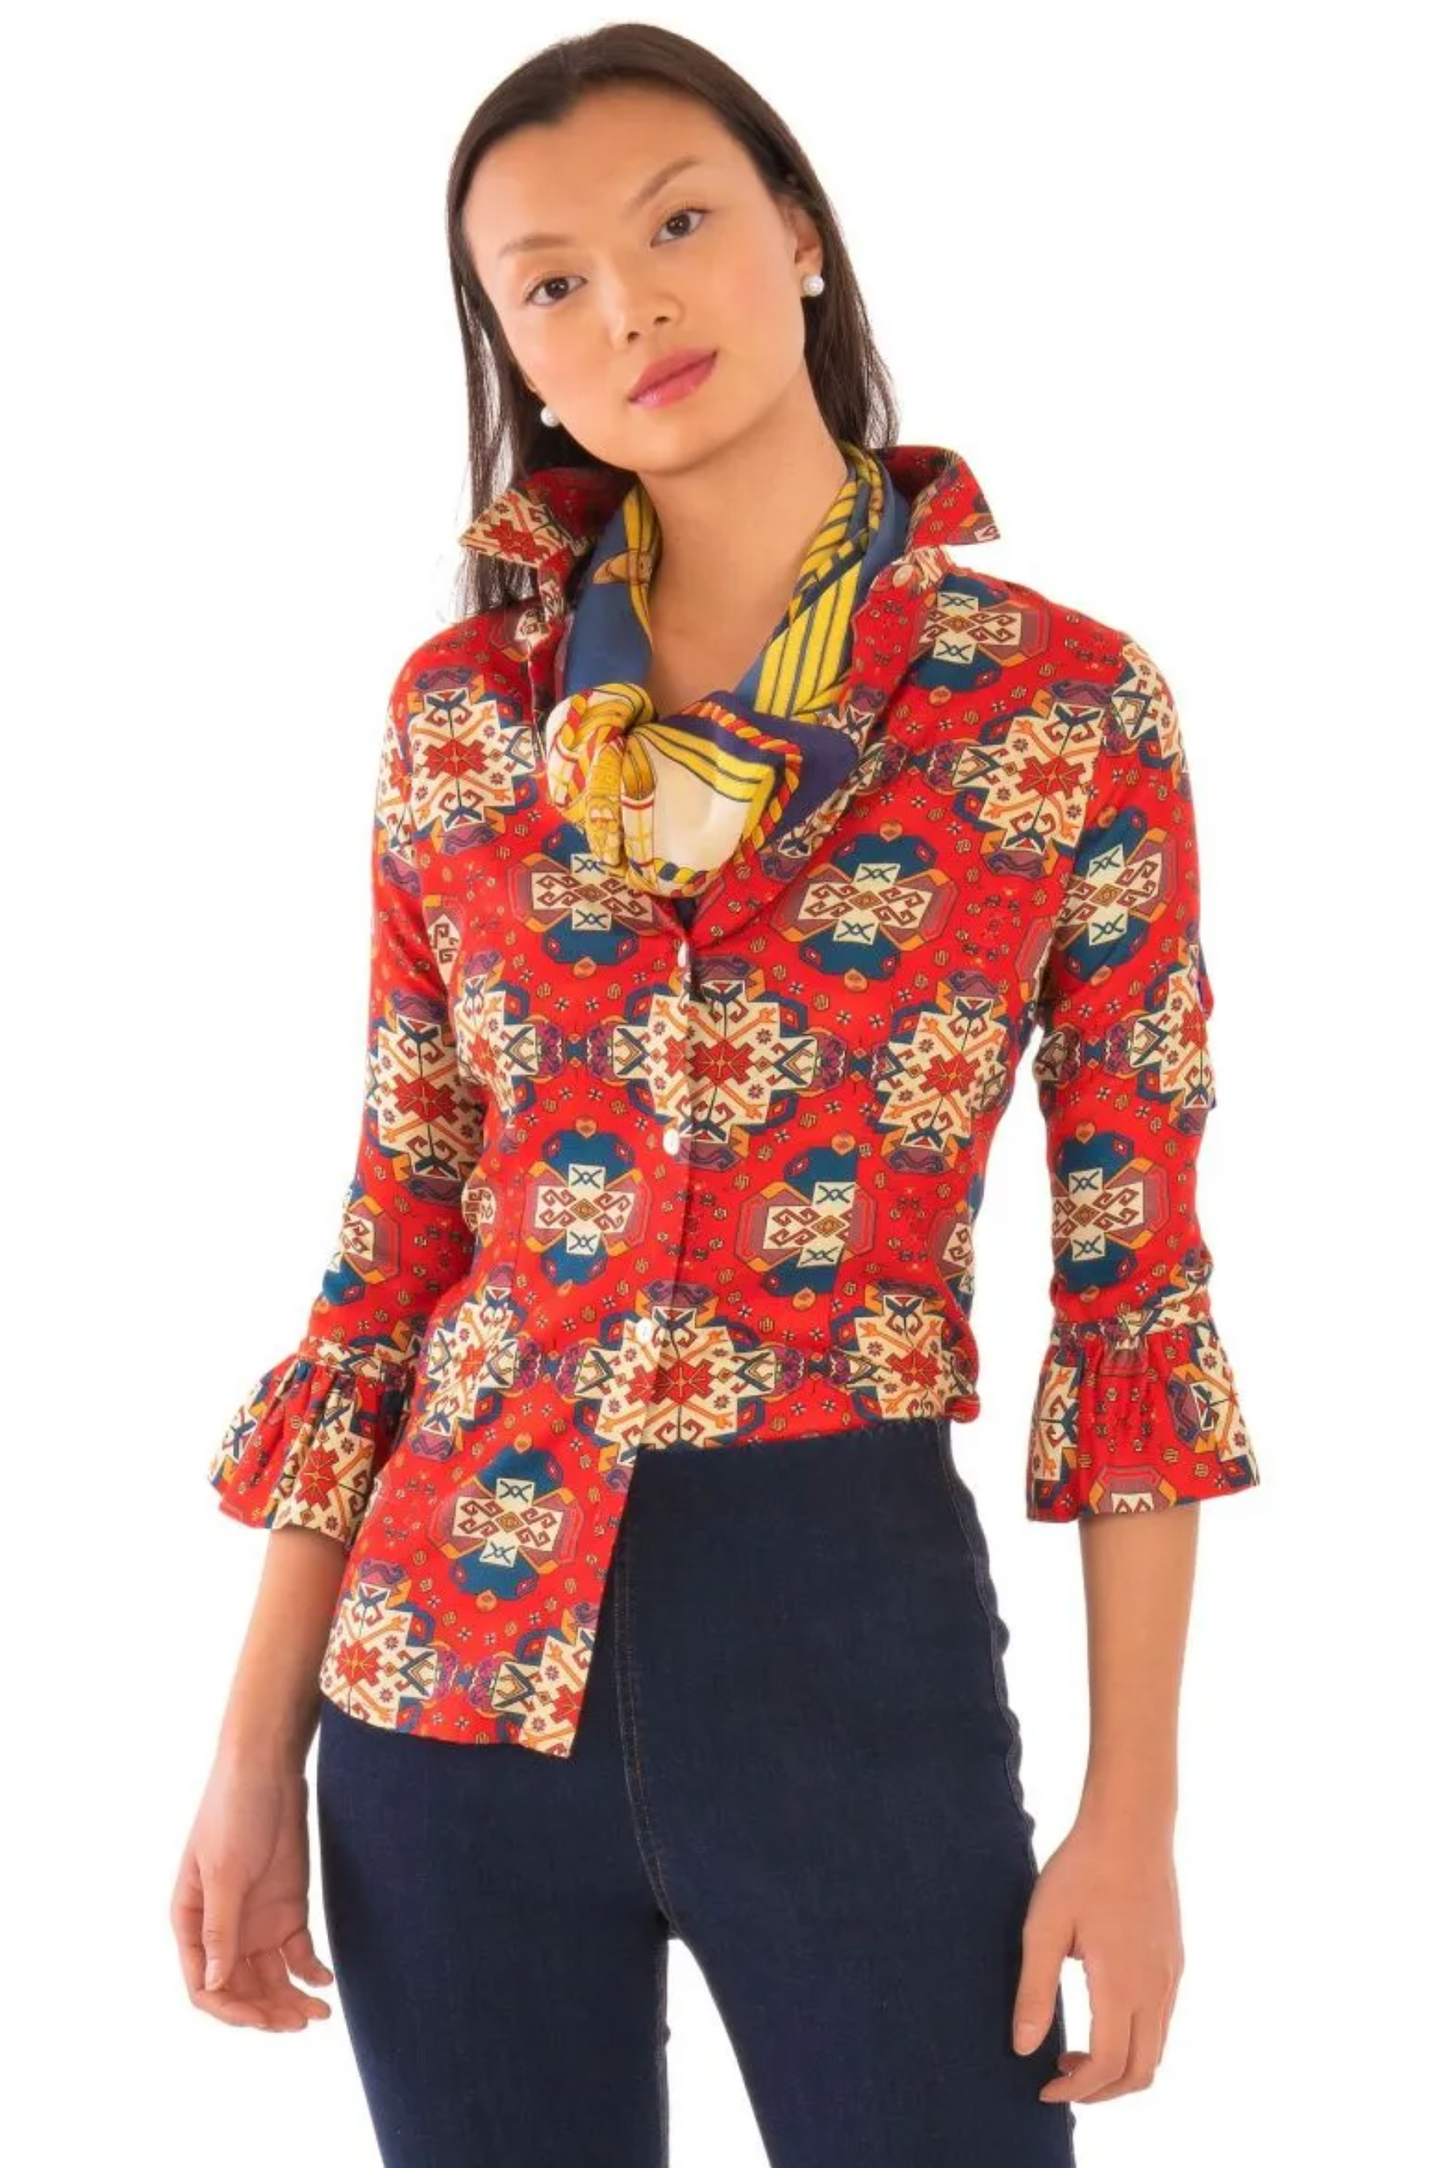 Priss Blouse-Turkey Trot Red